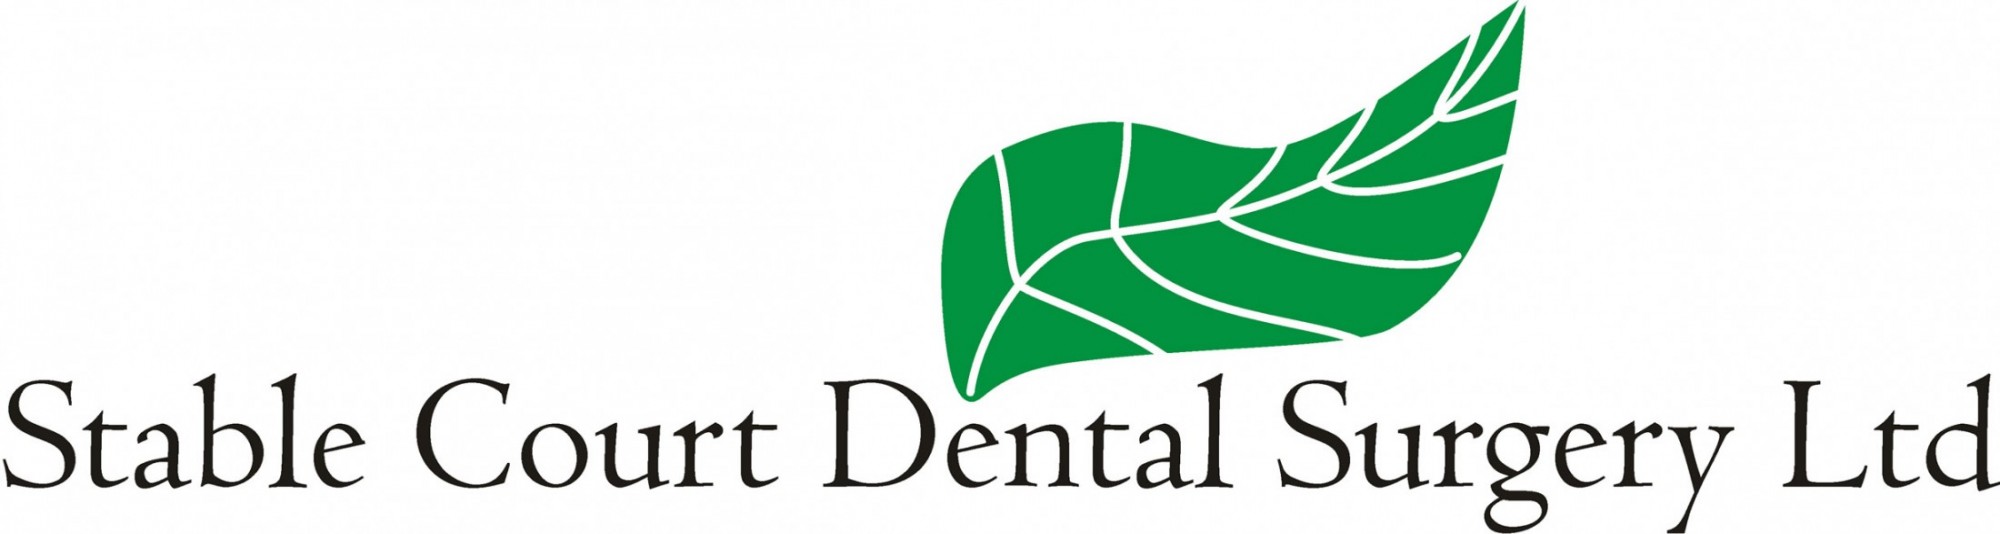 About | Stable Court Dental Surgery